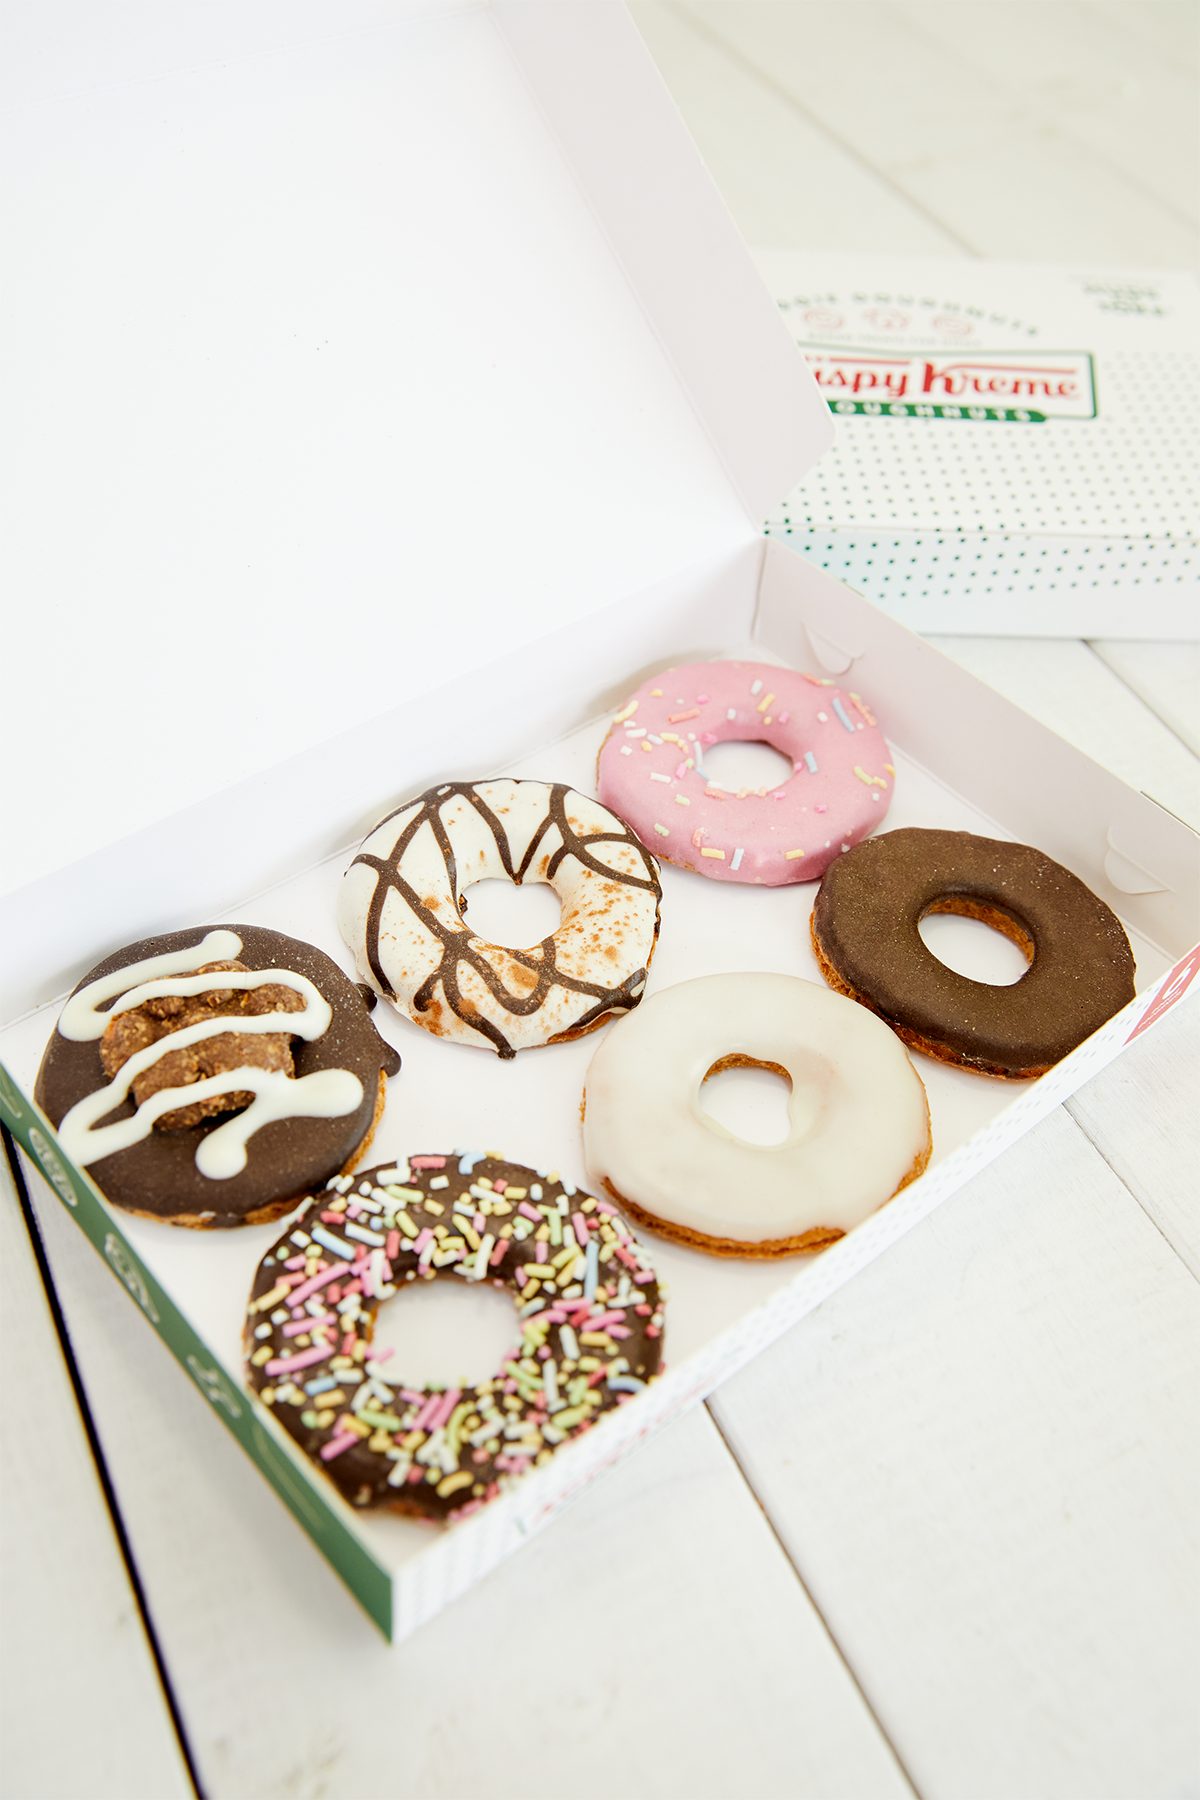 Krispy Kreme to release 'Doggie Doughnuts' for your pets this International Dog’s Day